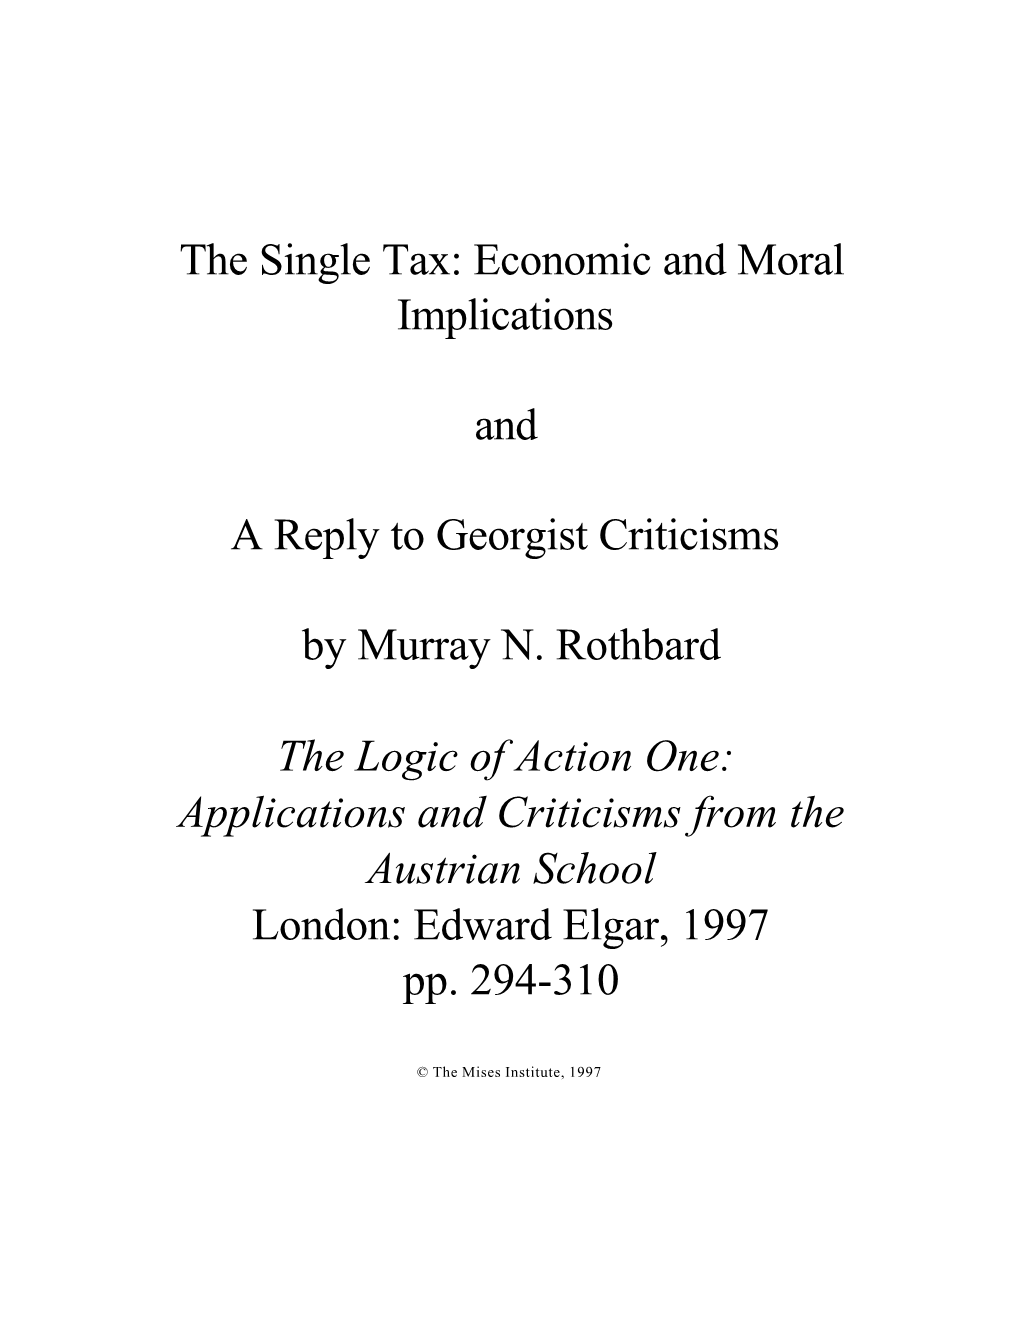 The Single Tax: Economic and Moral Implications